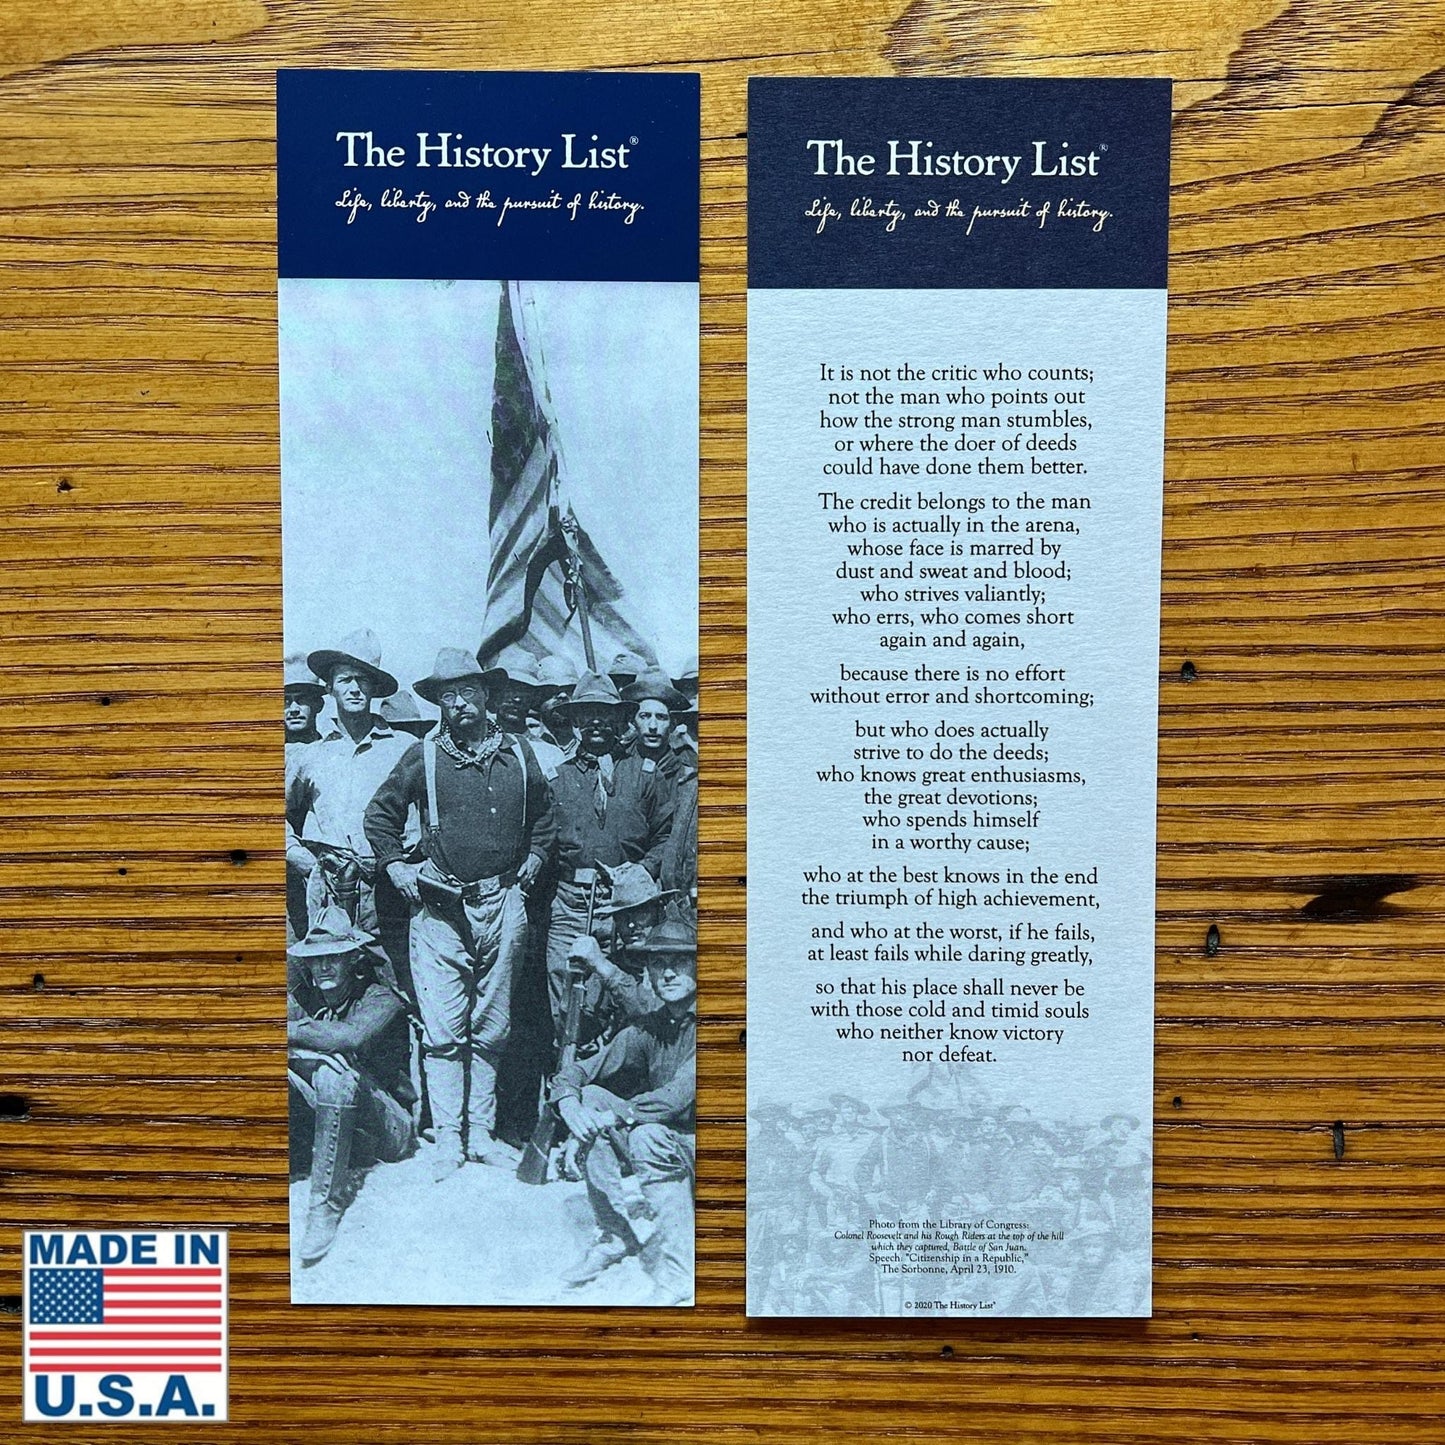 Teddy Roosevelt "Rough Riders" Bookmark from The History List sstore